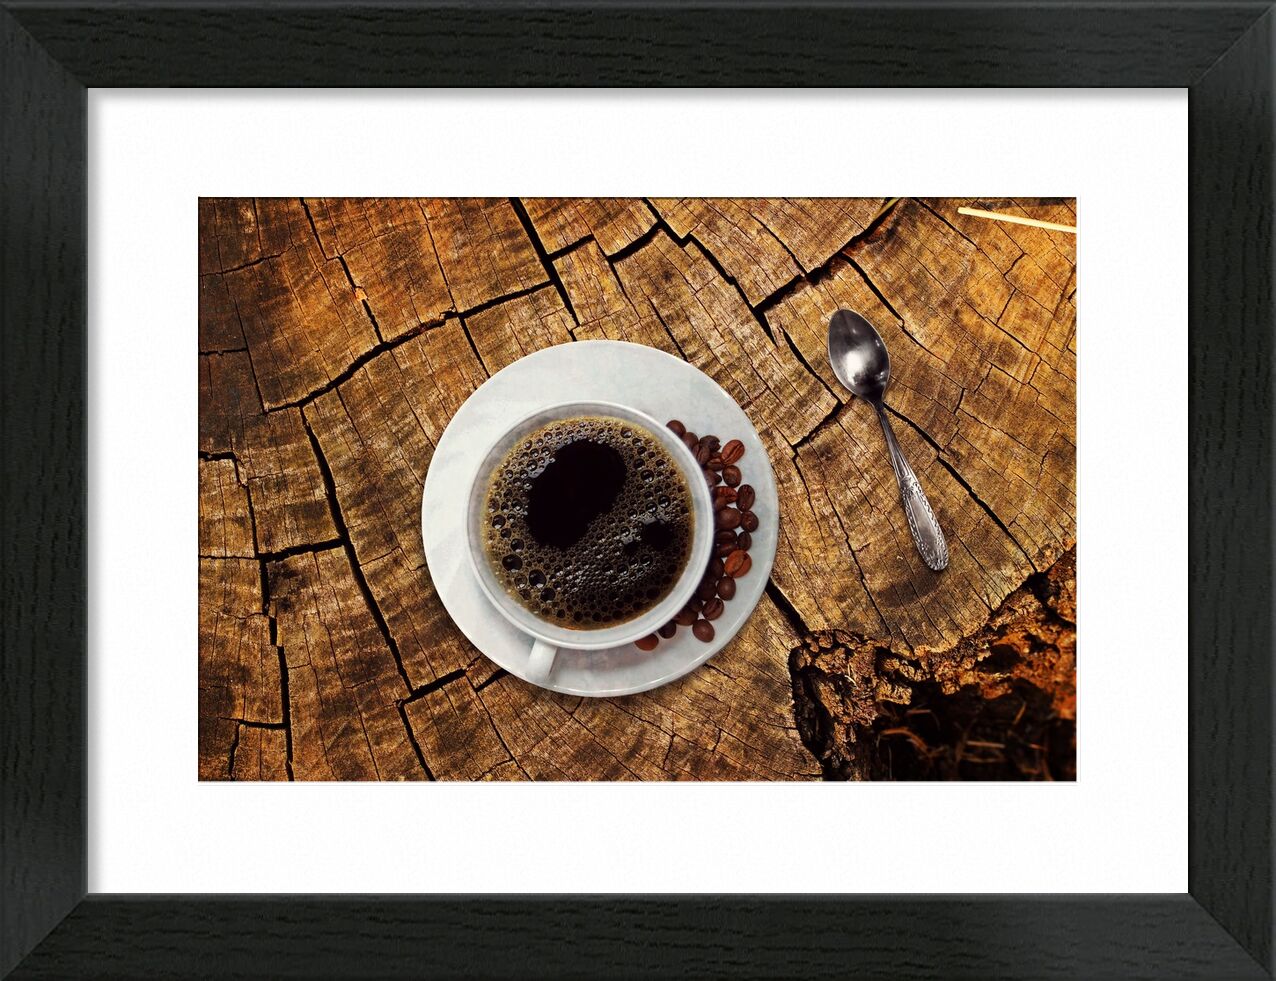 The coffee tree from Pierre Gaultier, Prodi Art, wood grain, coffee break, coffee spoon, gastronomy, break, benefit from, wooden table, beans, coffee cup, old, wood, aroma, table, still life, coffee beans, beverage, cup, coffee